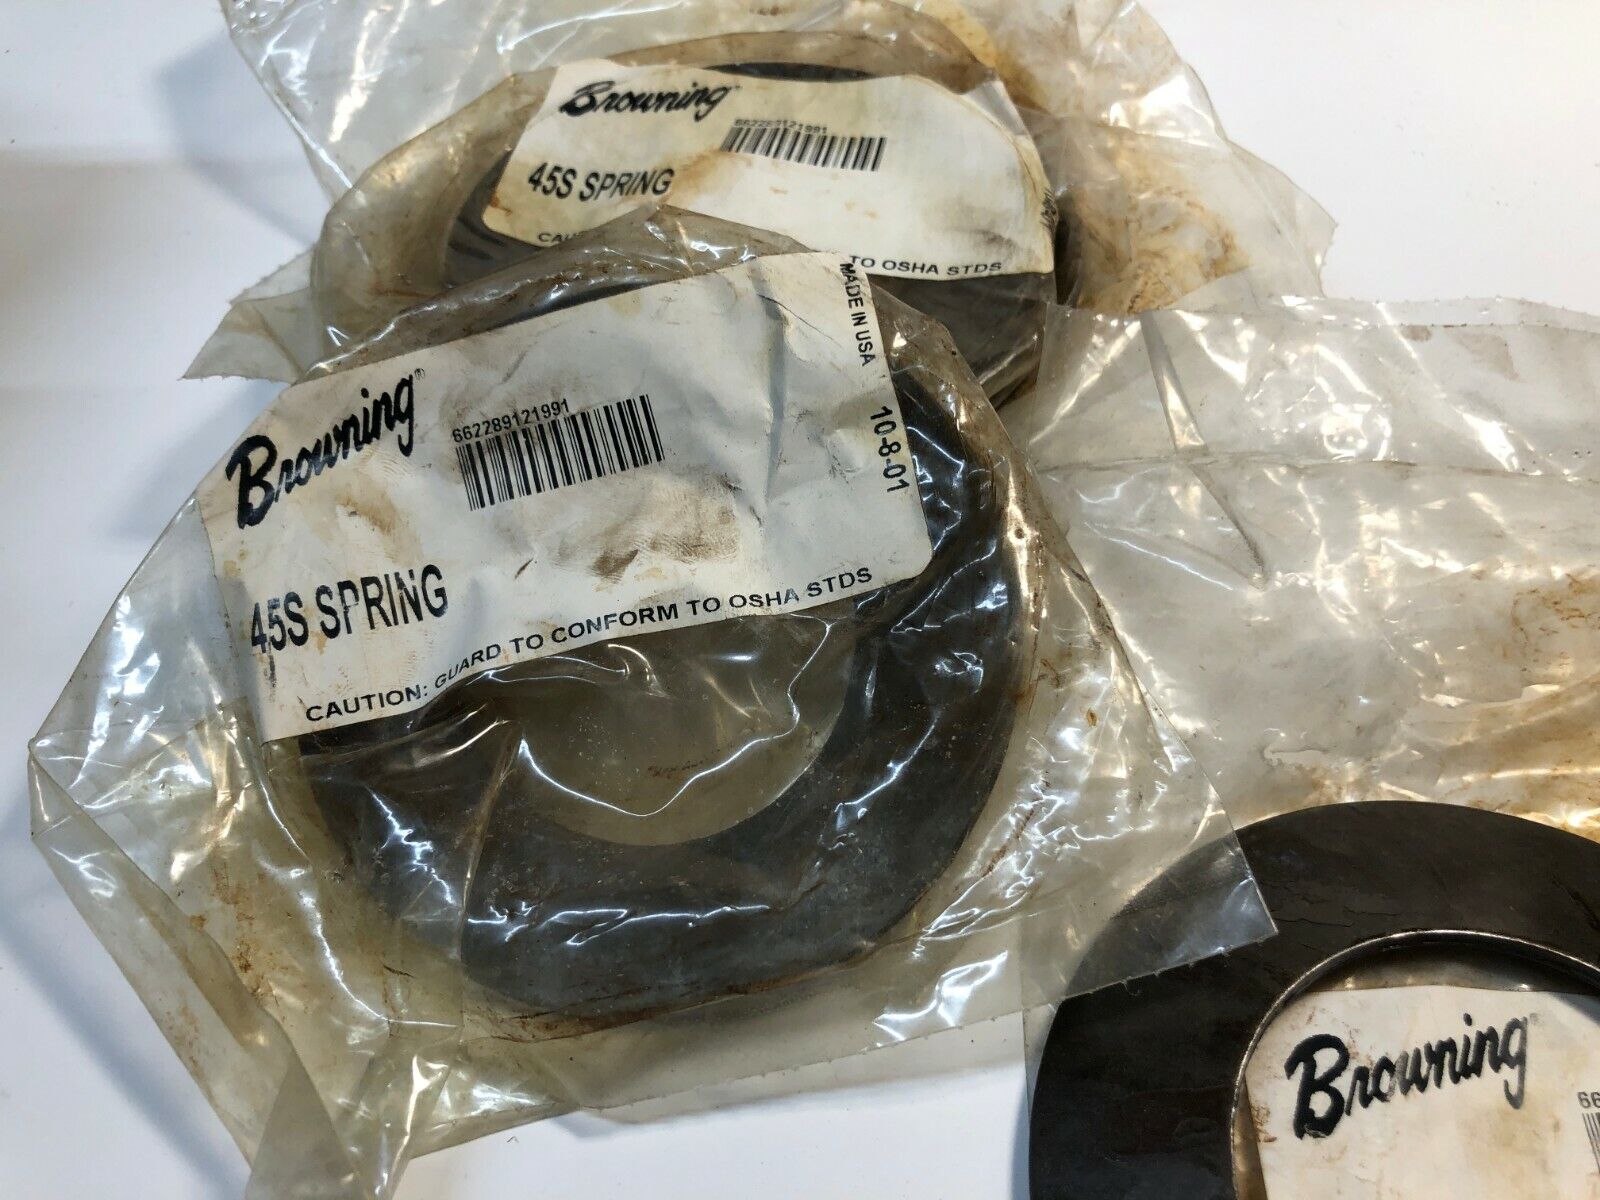 Browning Gifts Beauty products 45S Spring bag. New in